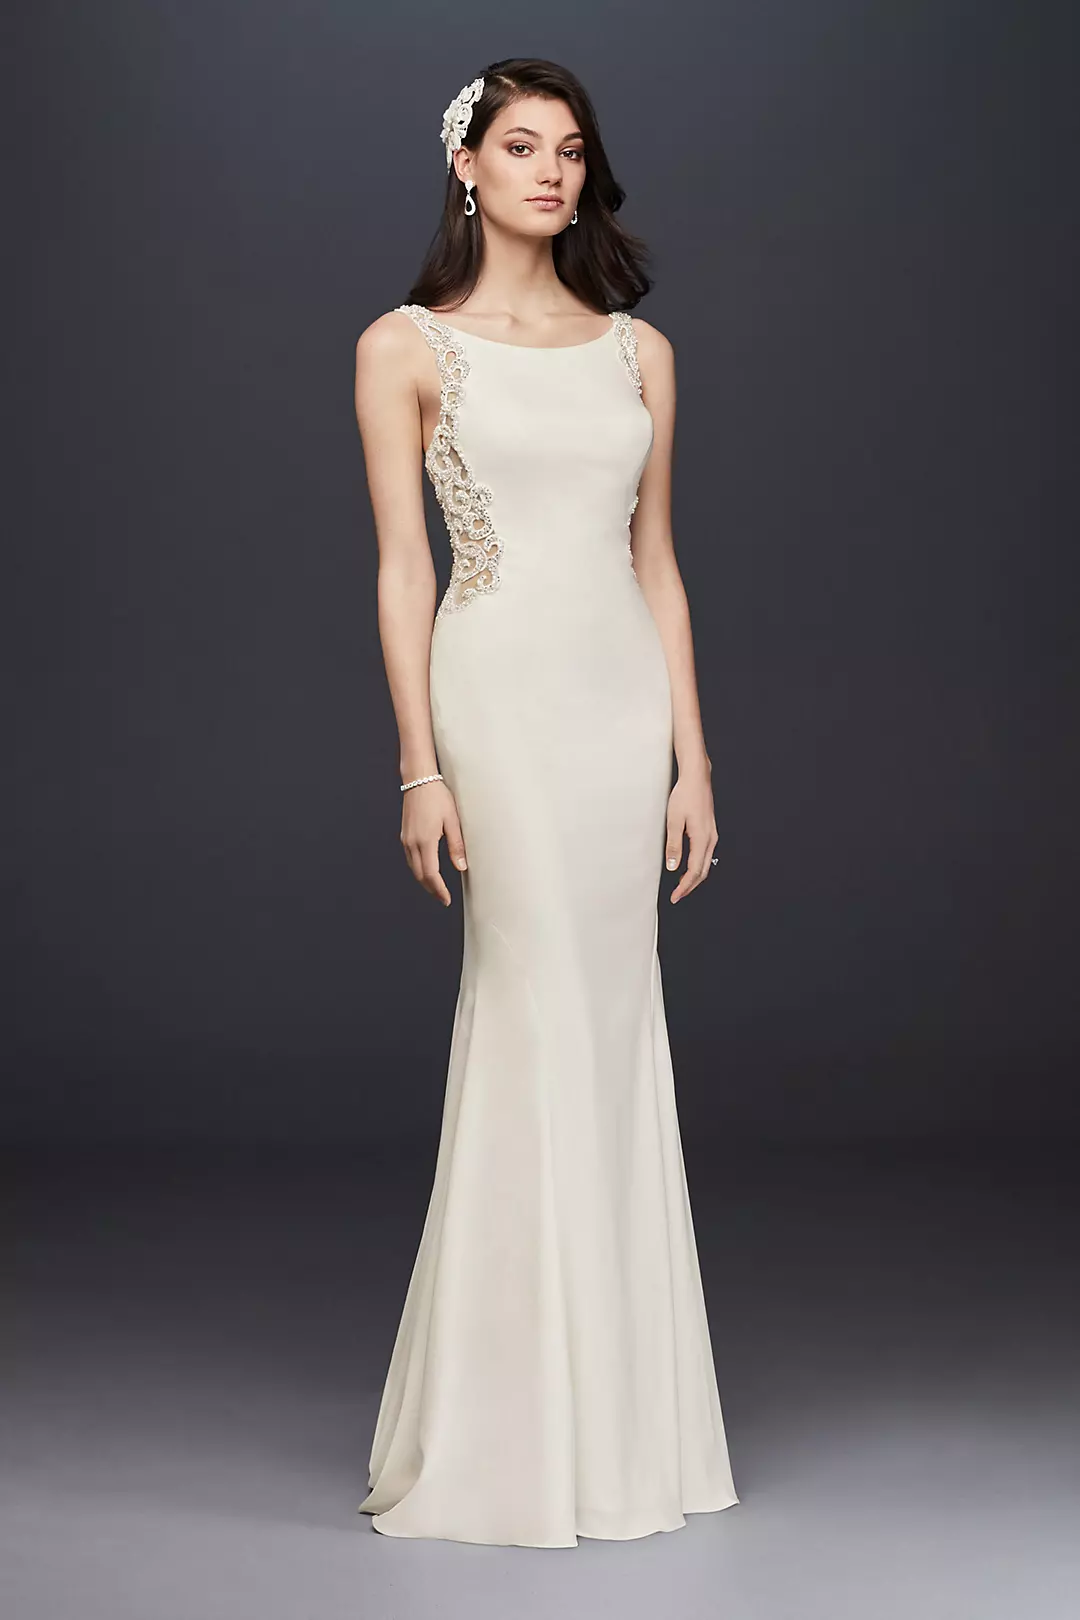 As Is Beaded and Crepe Petite Wedding Dress Image